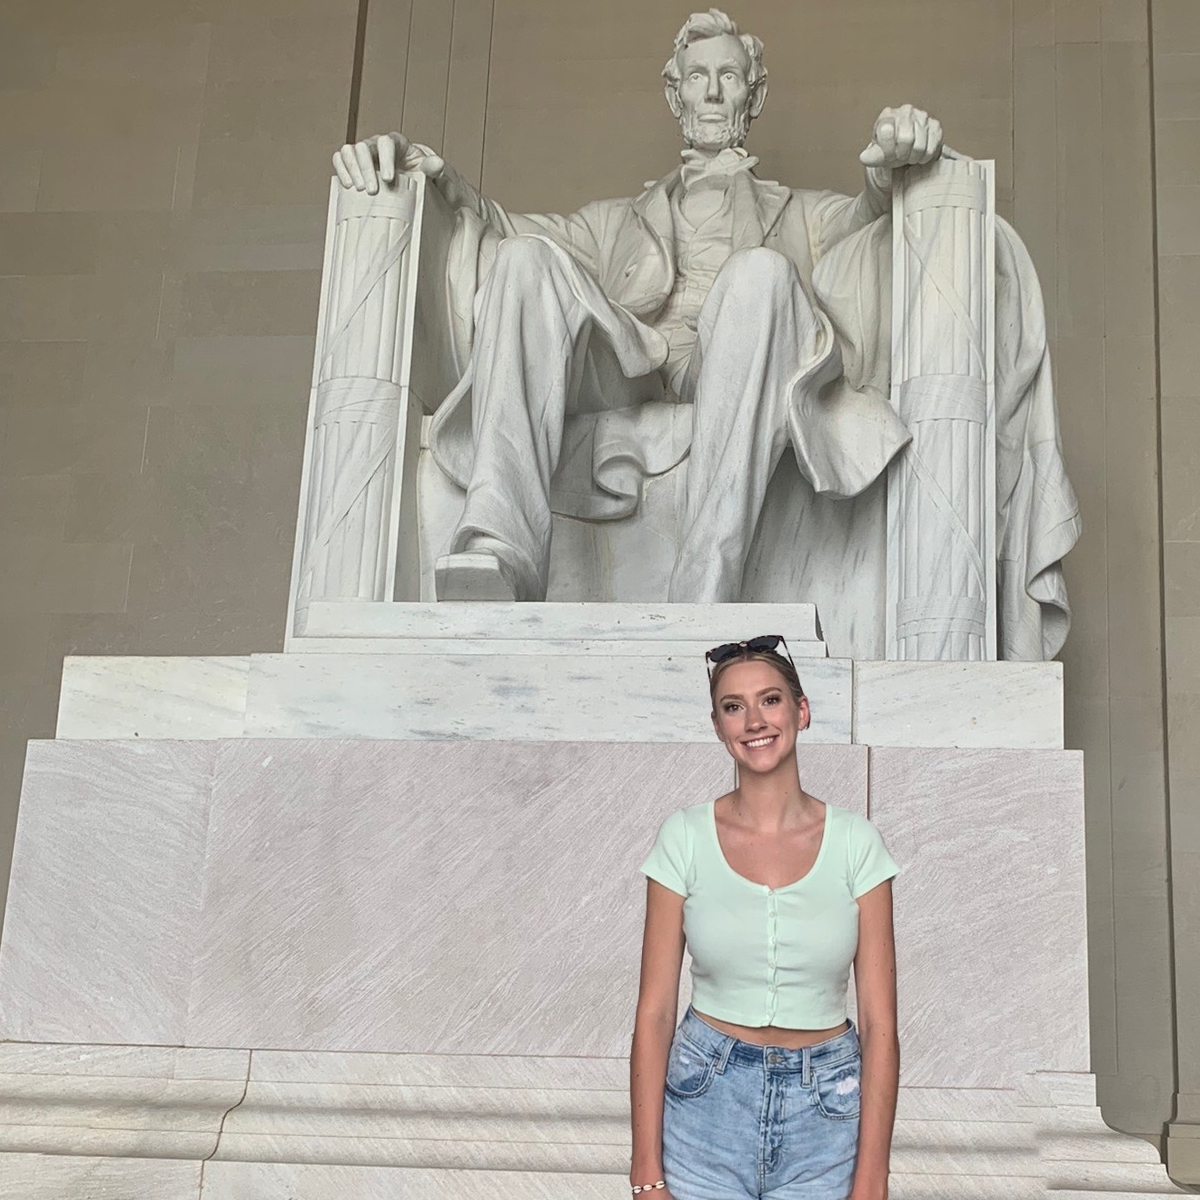 Camryn Treacy in front of the Araham Lincoln statue